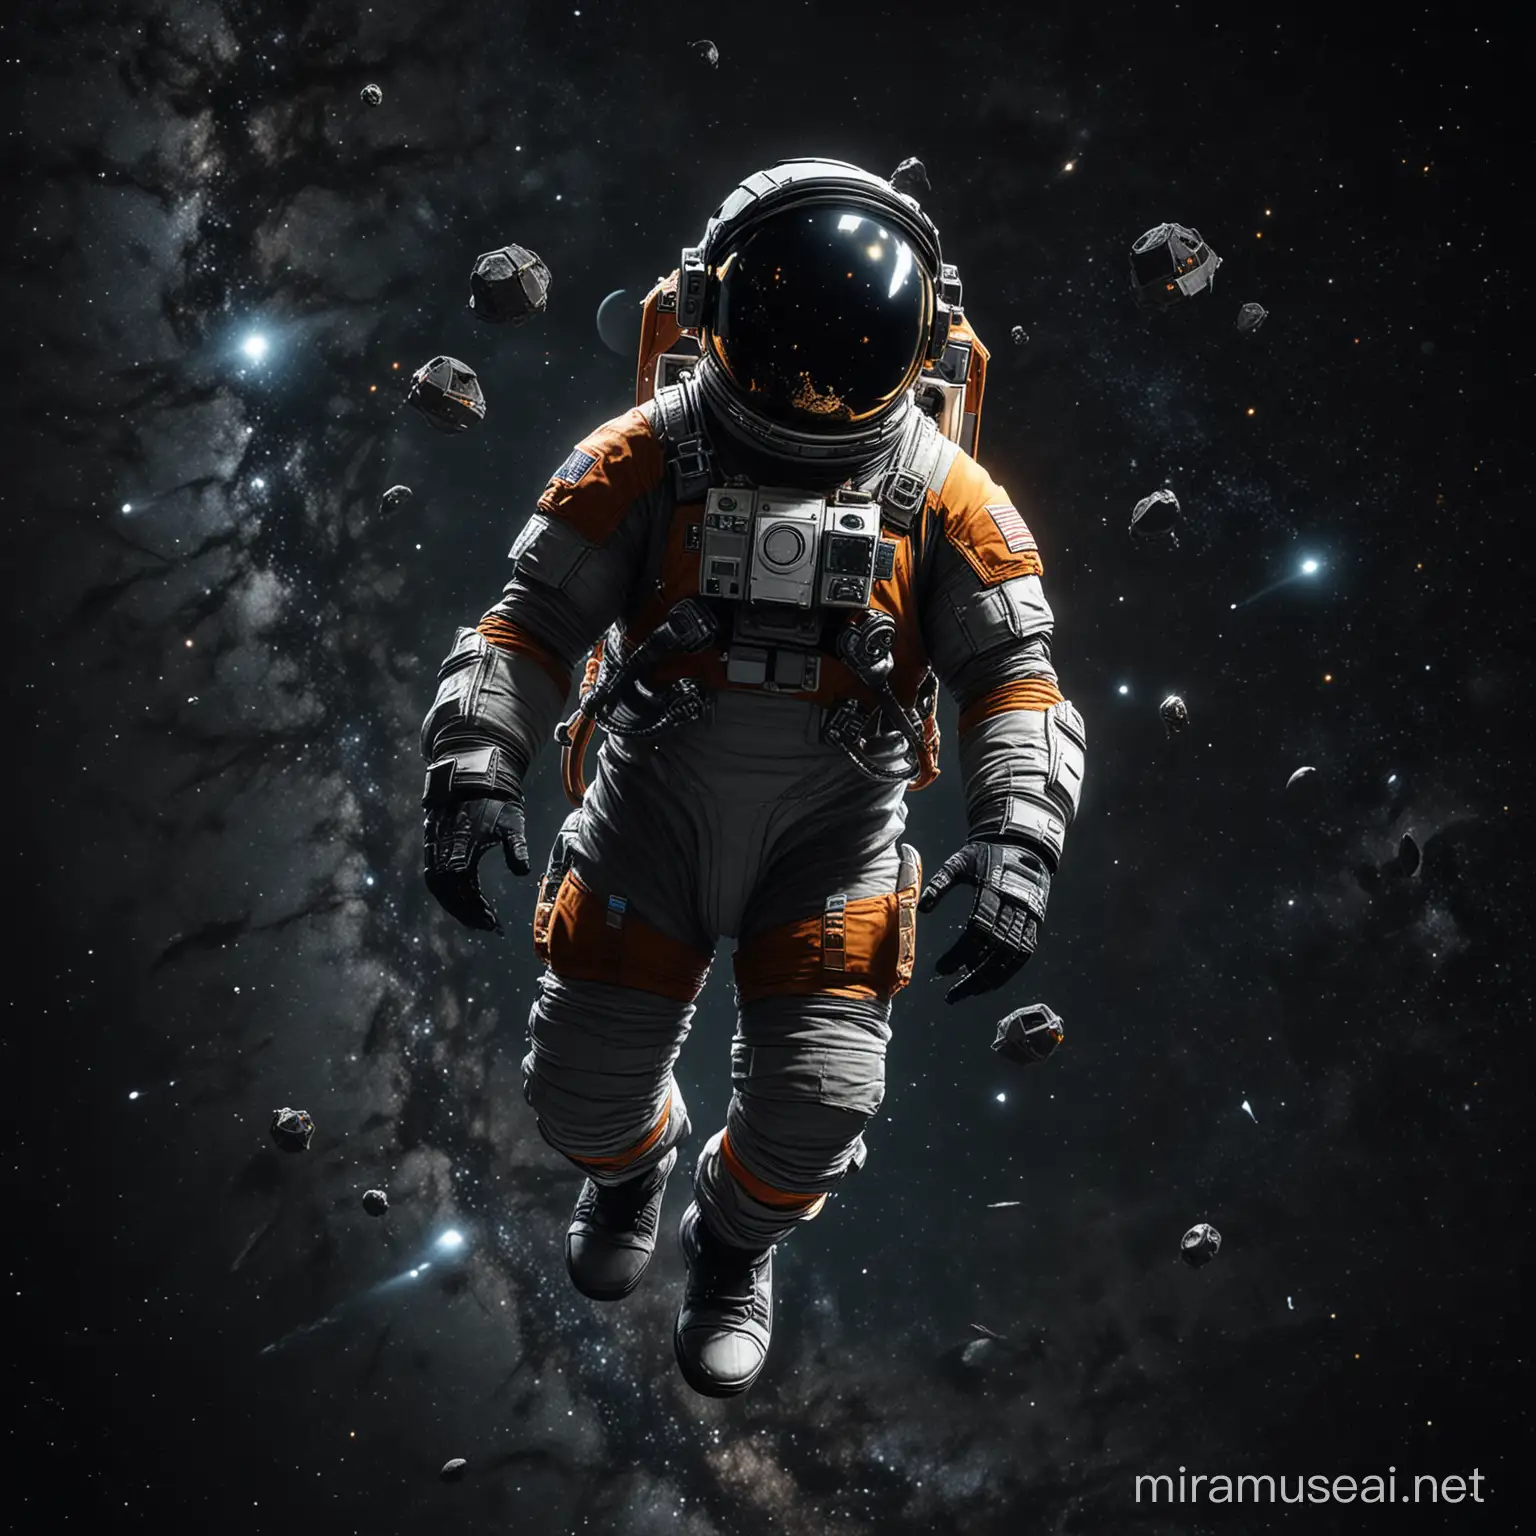 Astronaut Floating in Space Futuristic No Mans Sky Style Image